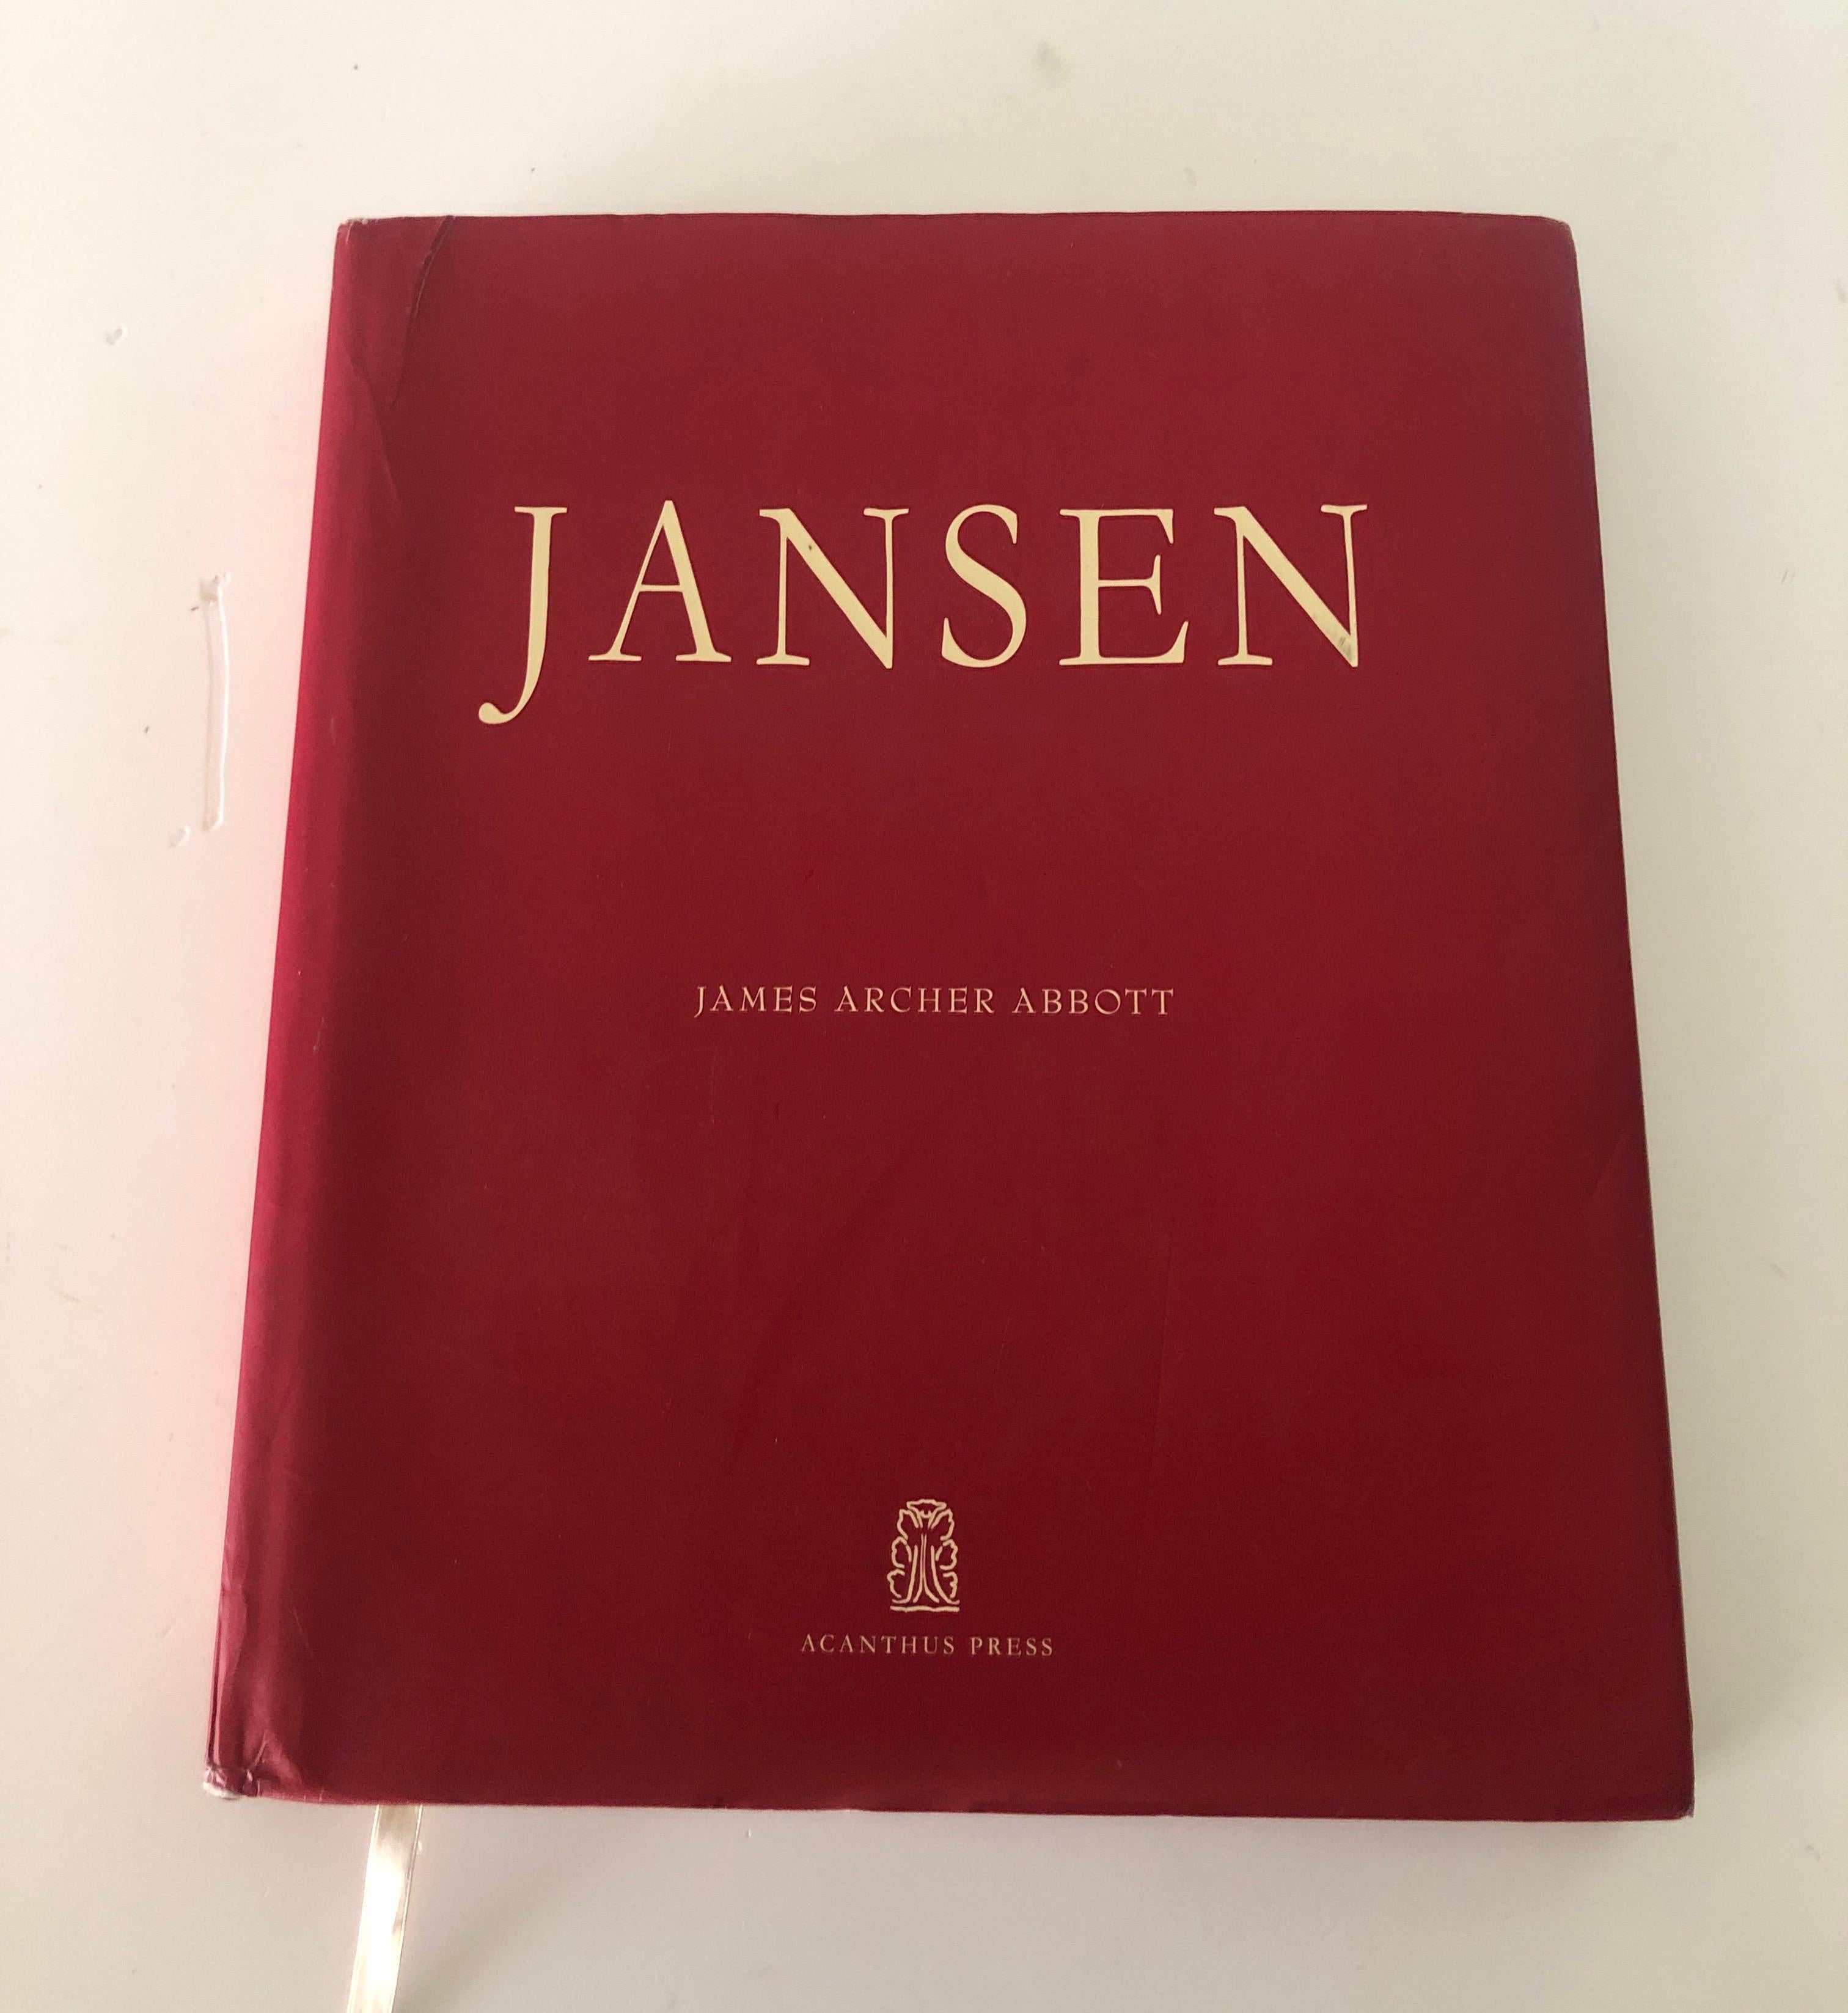 Jansen (20th Century Decorators) decorating hardcover book
JANSEN is the first comprehensive study of Maison Jansen - the most celebrated decorating house of the 20th century. the book documents the evolution of this legendary Paris-based company